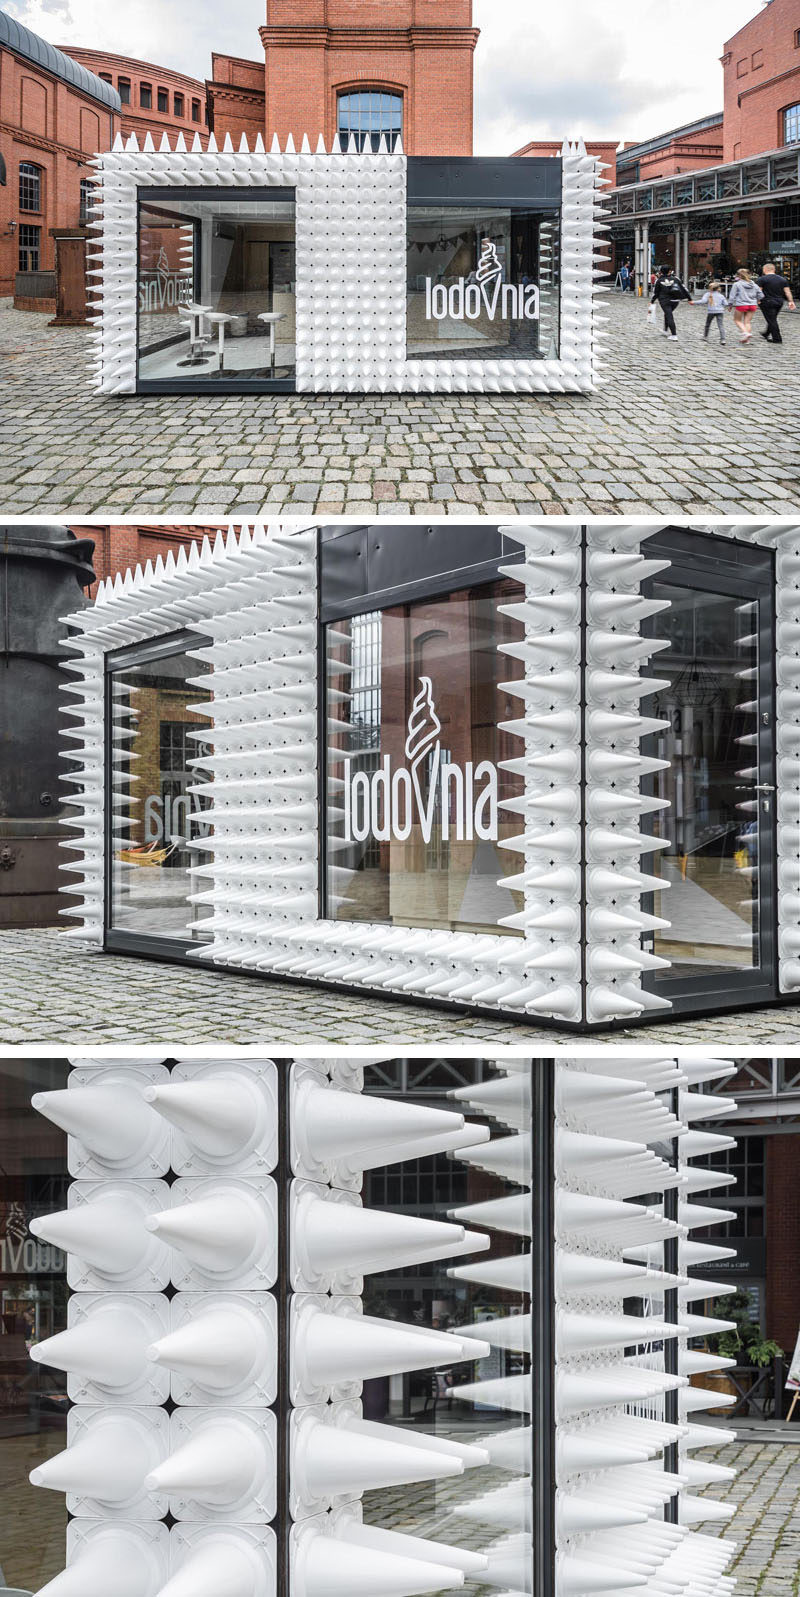 mode:lina architekci have designed LODOVNIA, a mobile ice cream shop in Poland that's covered in almost 1,000 white sports cones, representing the shape of an ice cream cone.